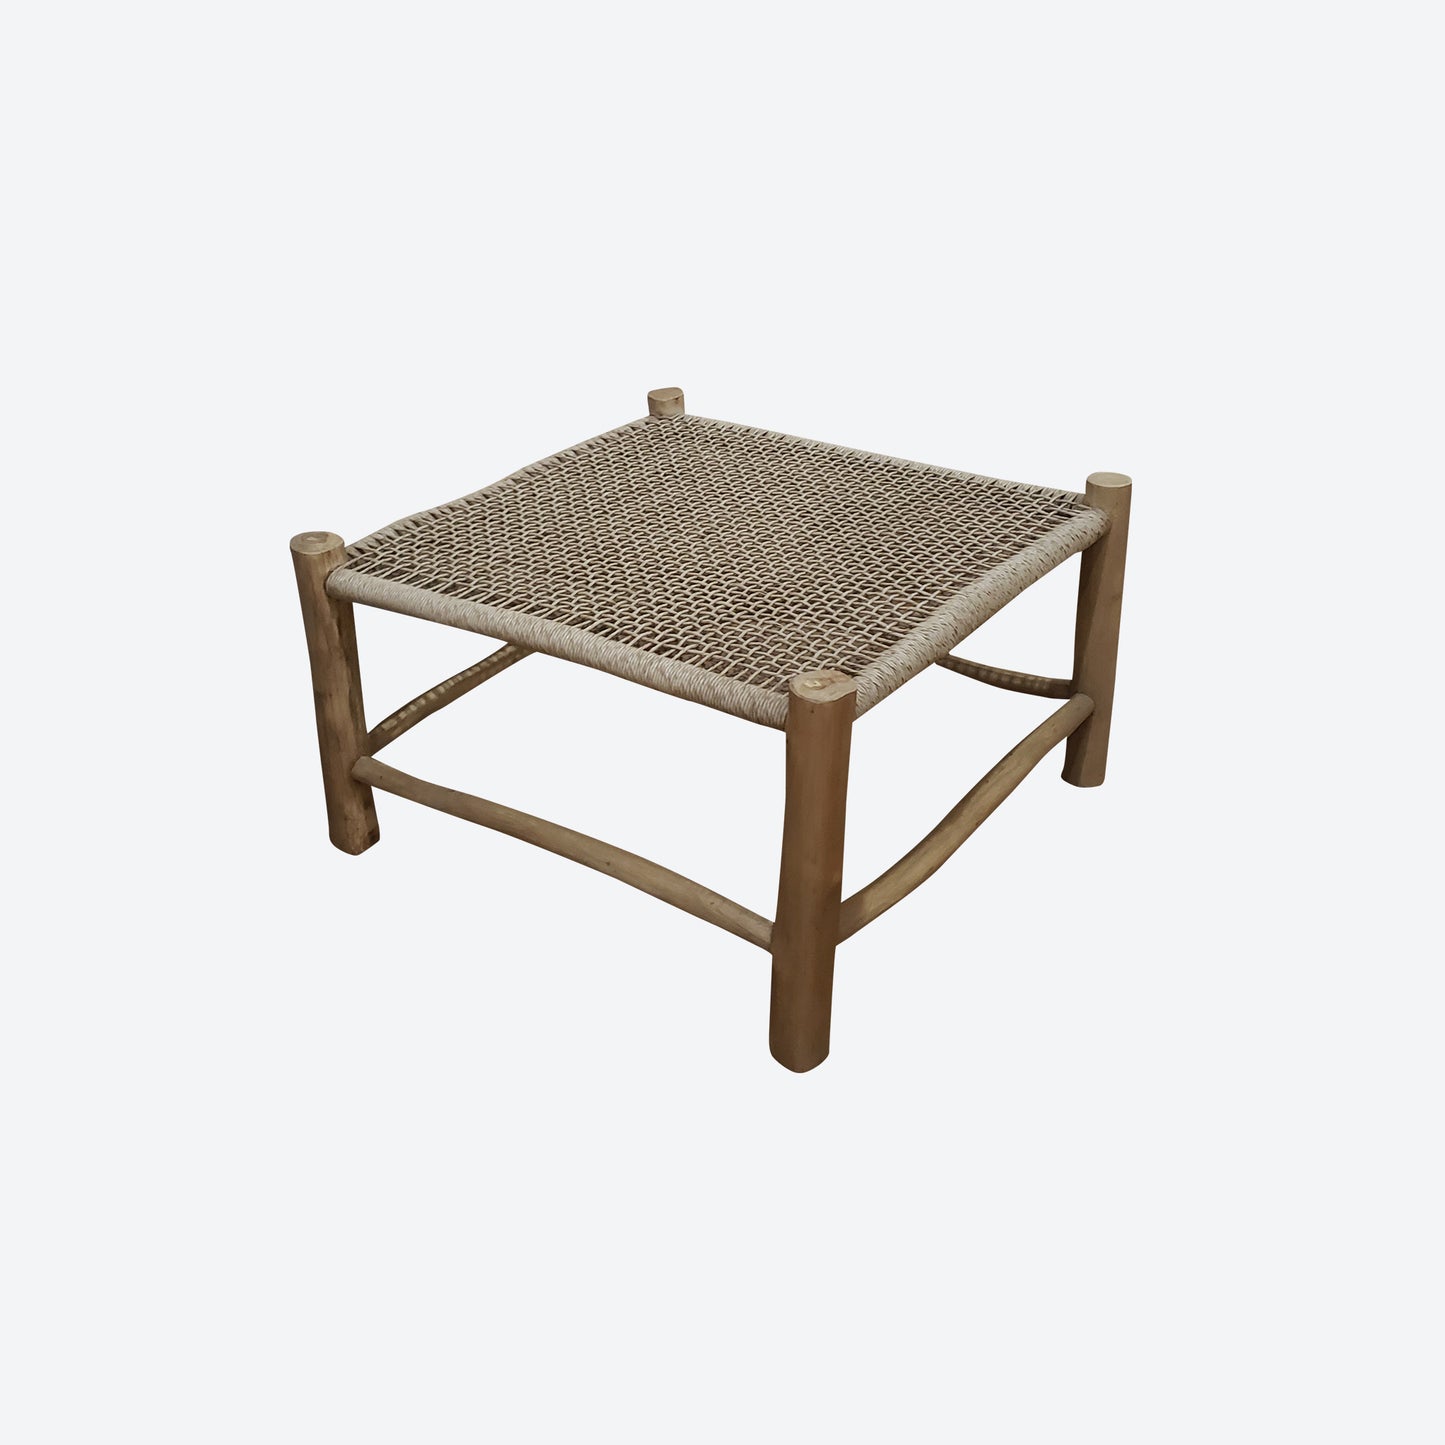 RATTAN SQUARE BAMBOO WOOD CENTER TABLE - SK- SKU 1026